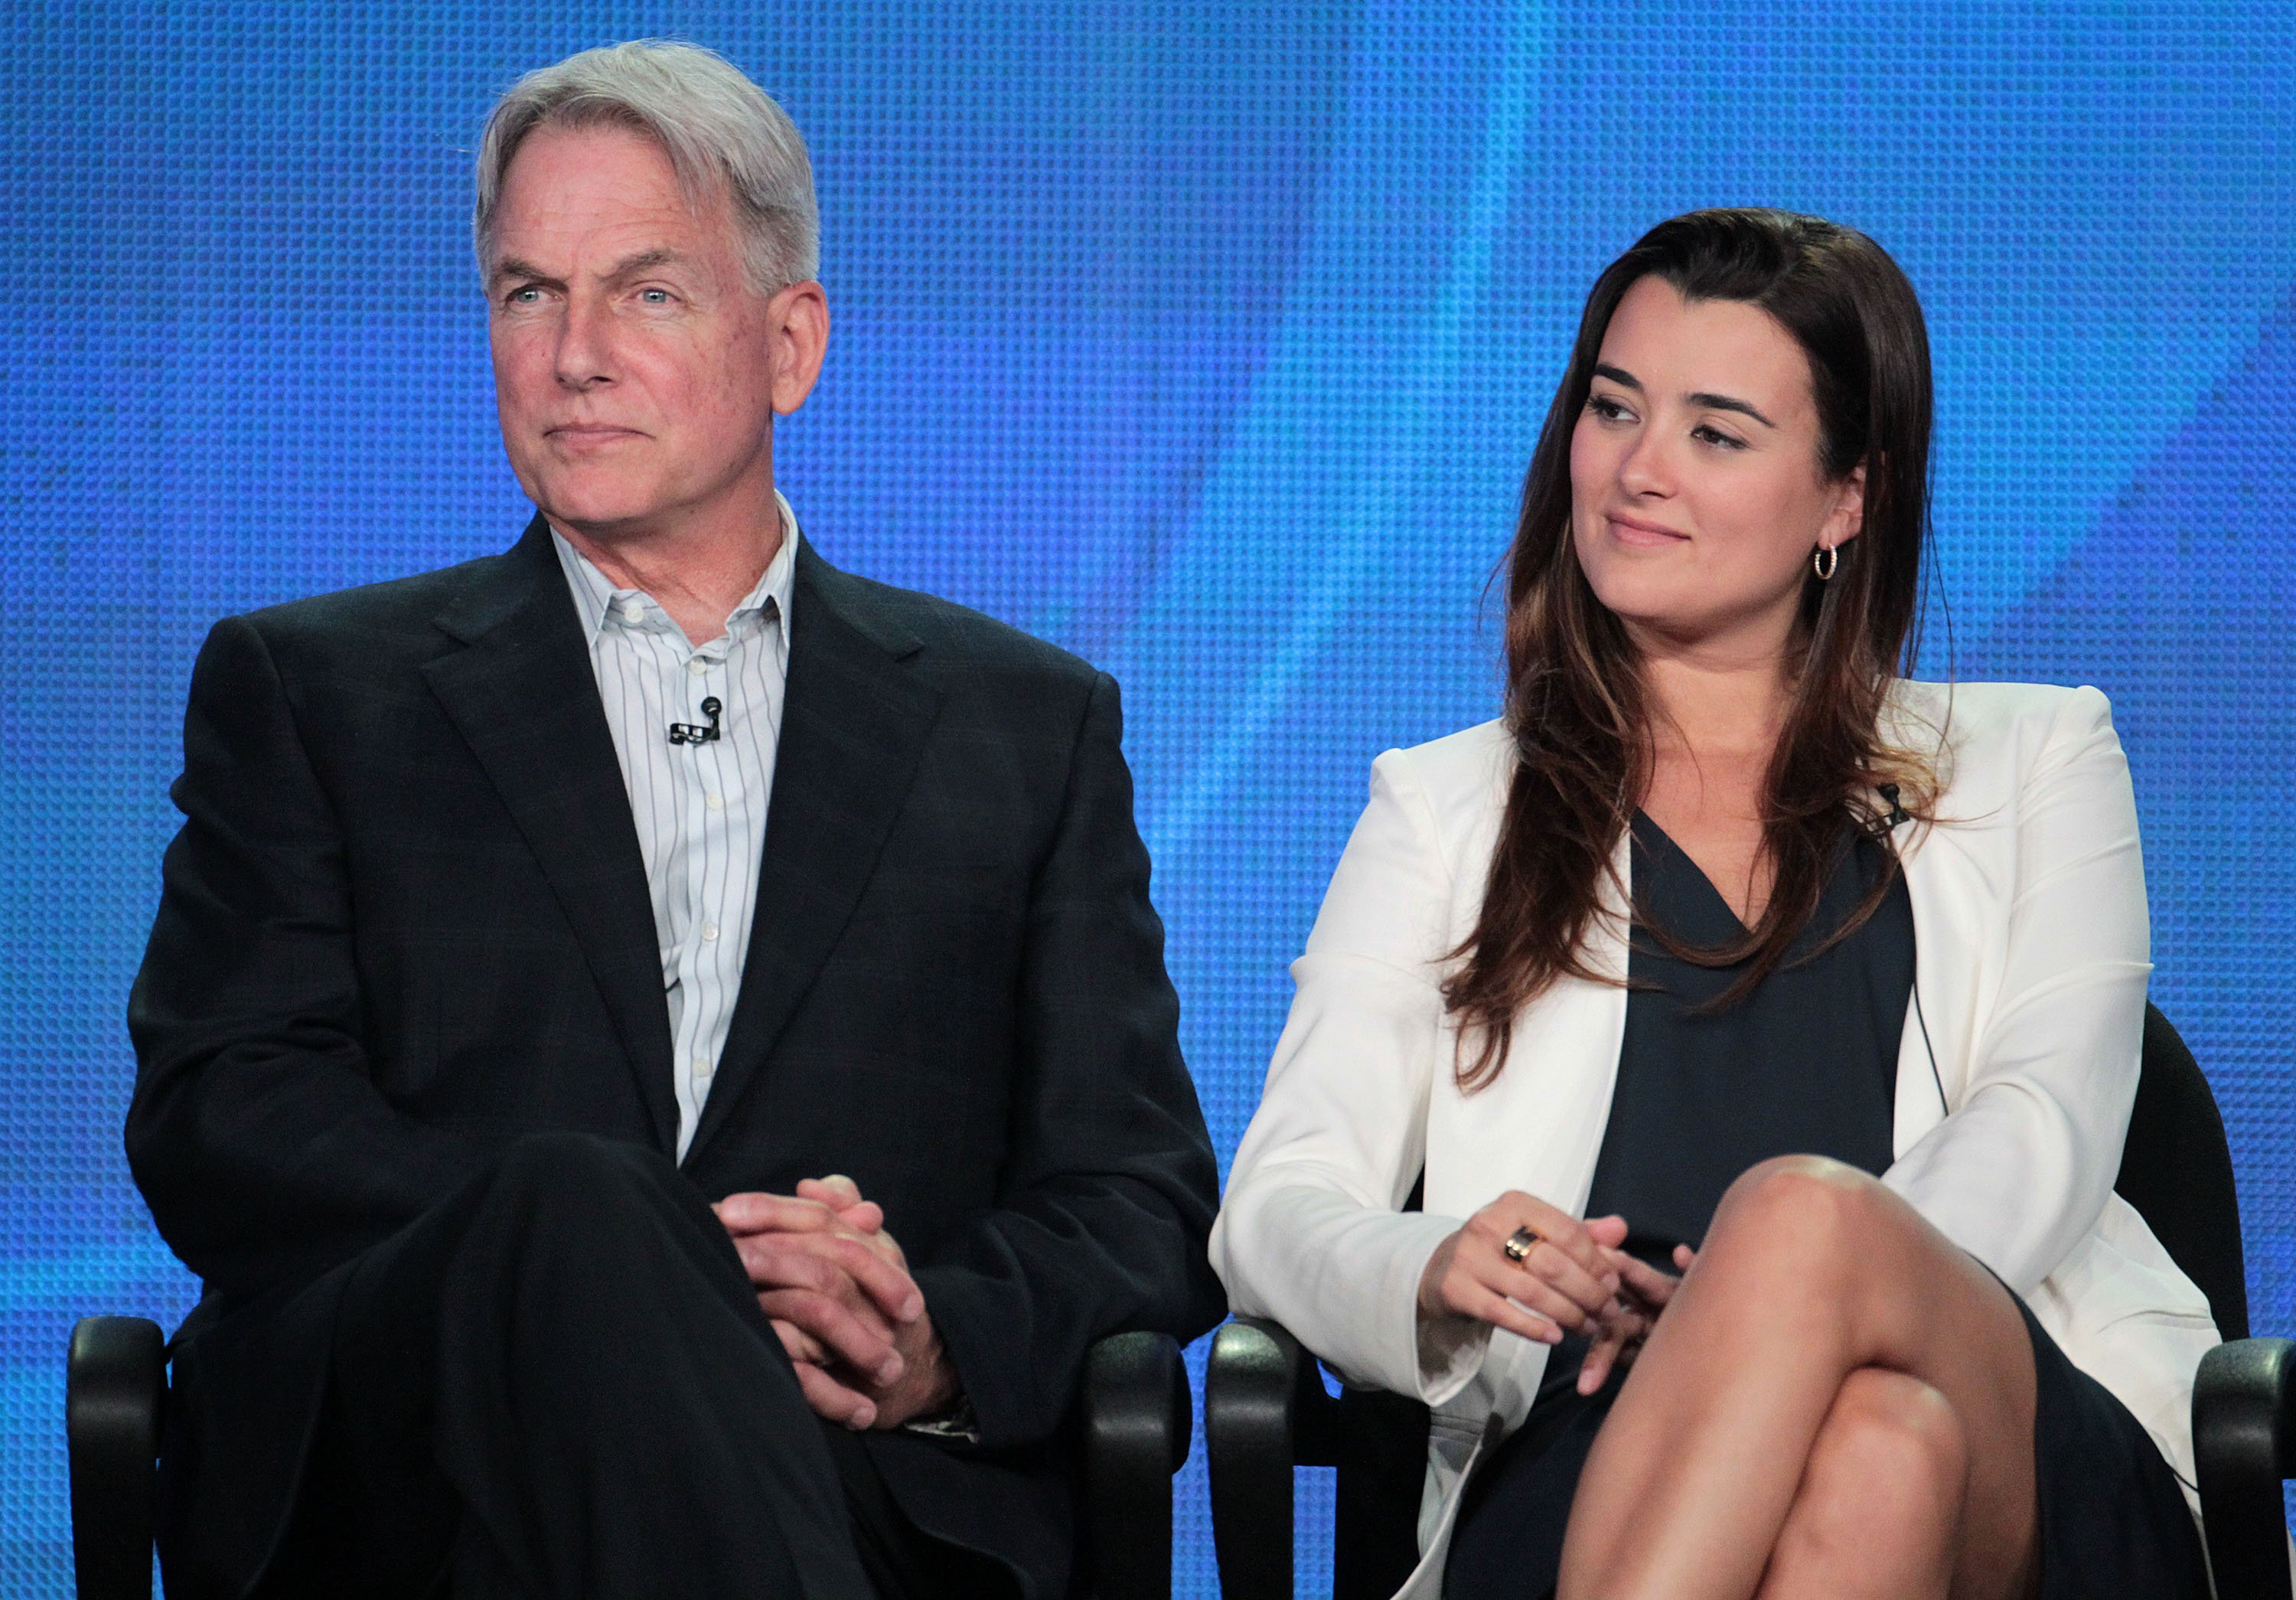 Mark Harmon and Cote de Pablo speak during the Television Critics Association Press Tour on January 11, 2012, in Pasadena, California. | Source: Getty Images.